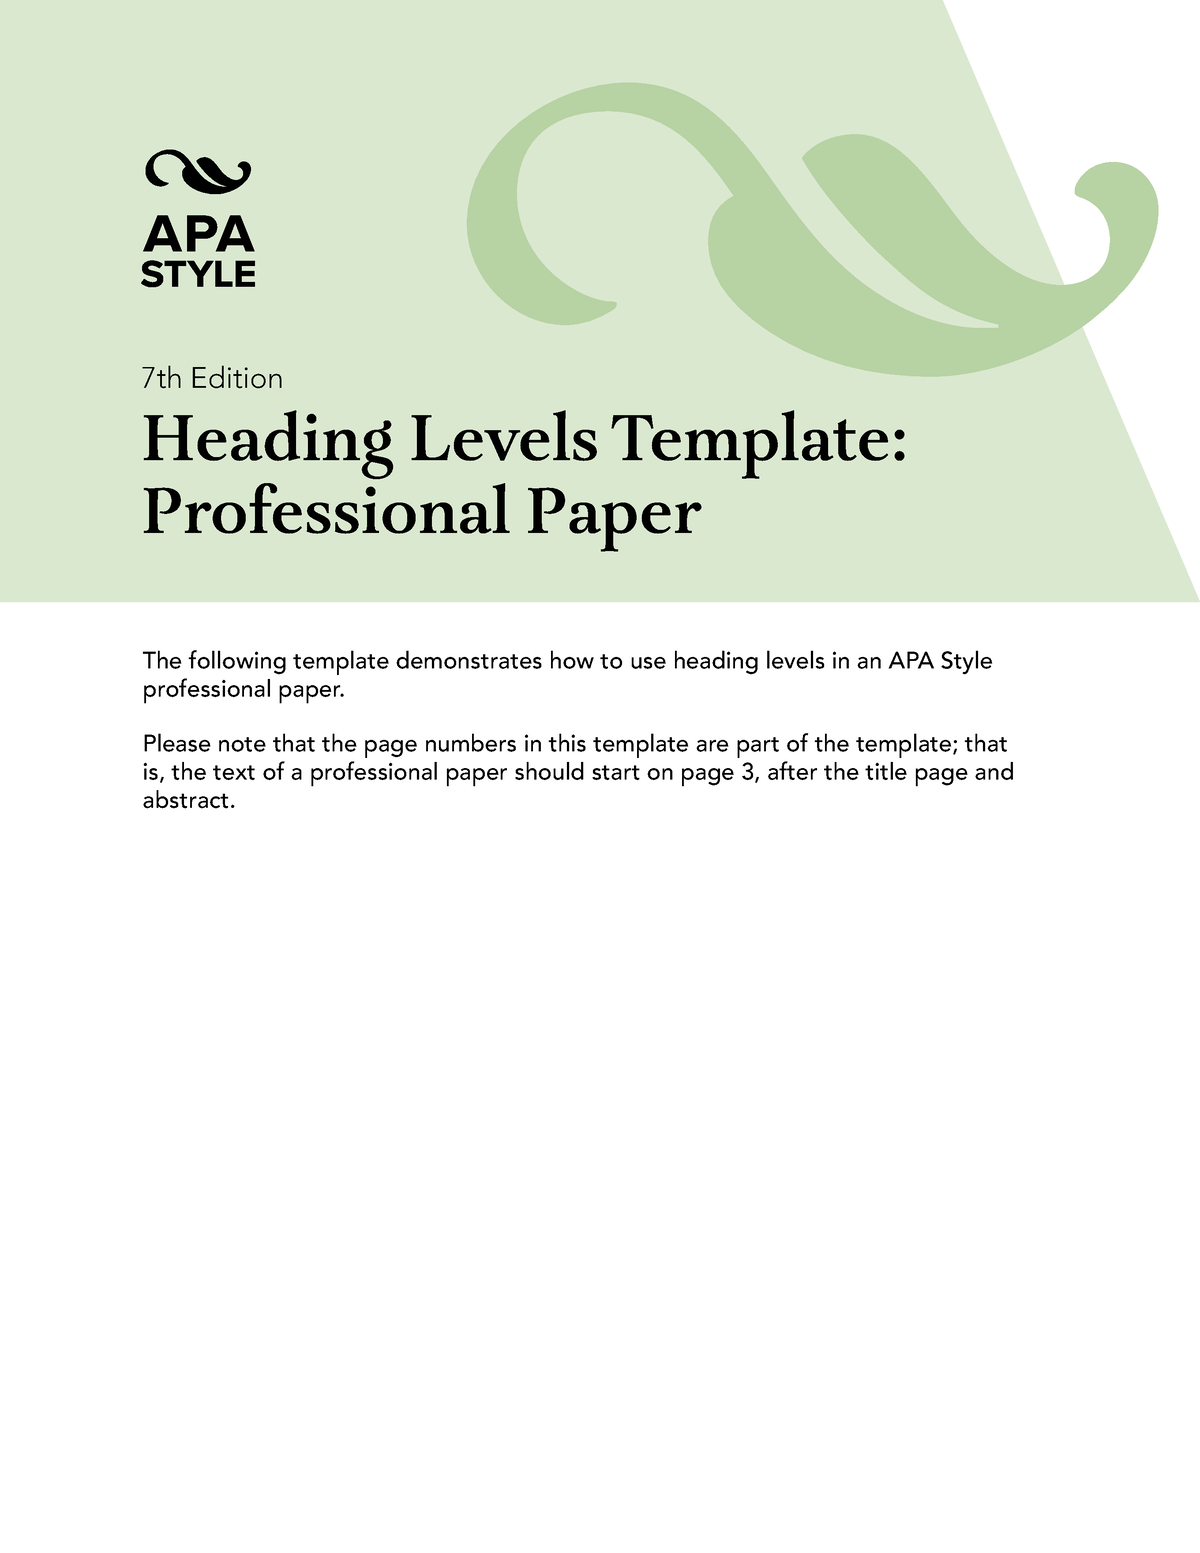 APA Title Page (7th edition)  Template for Students & Professionals